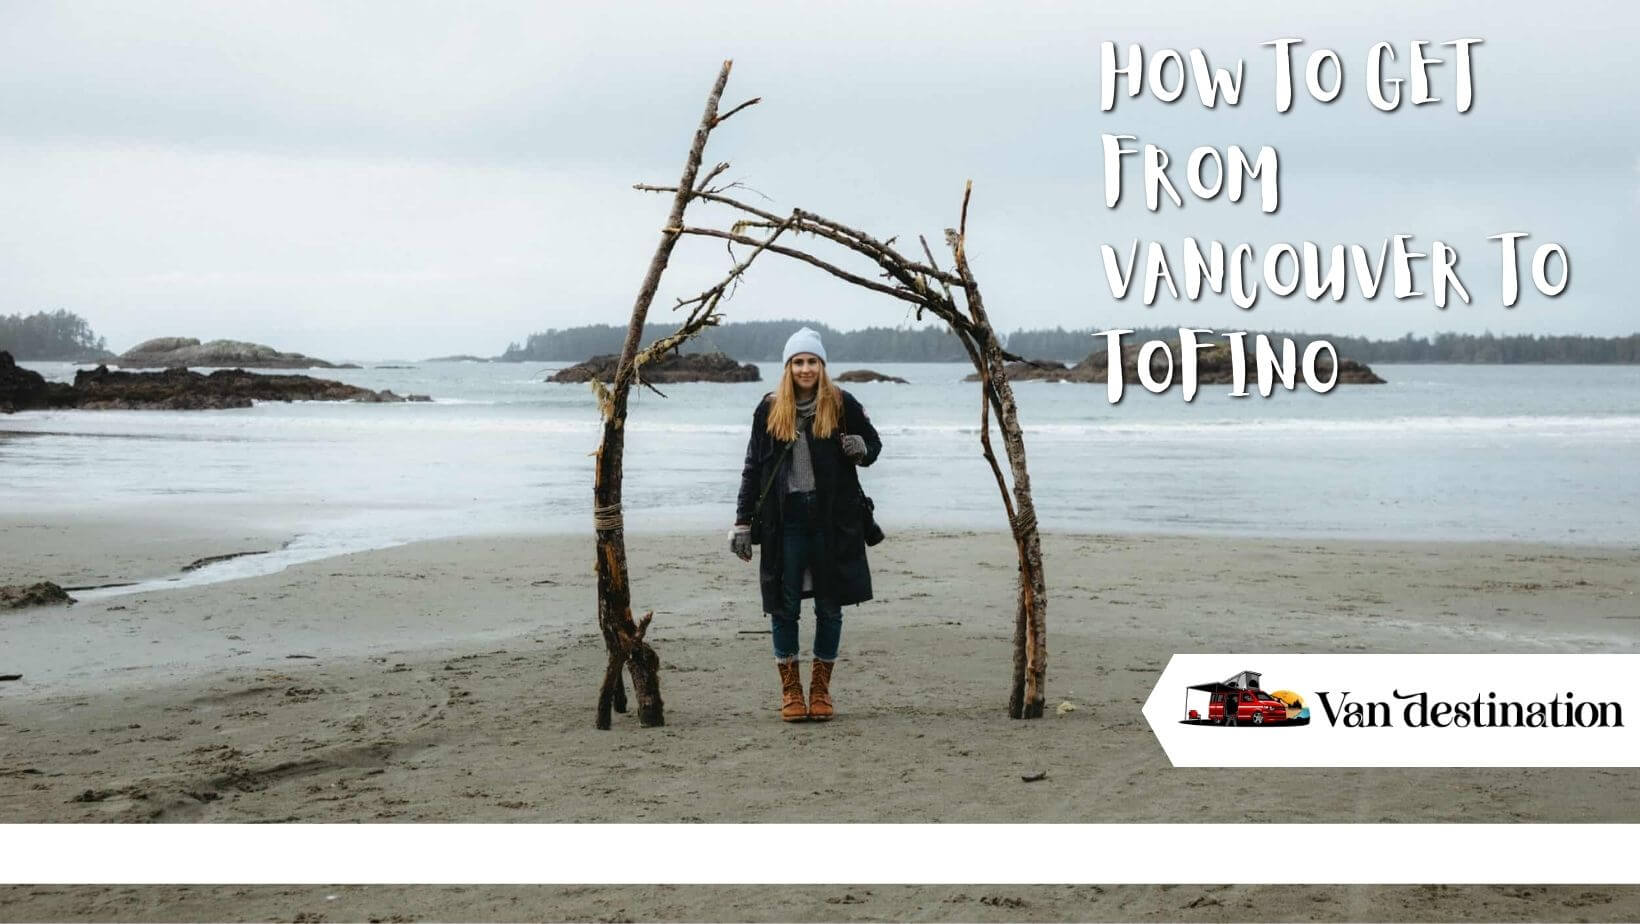 How to get from Vancouver to Tofino